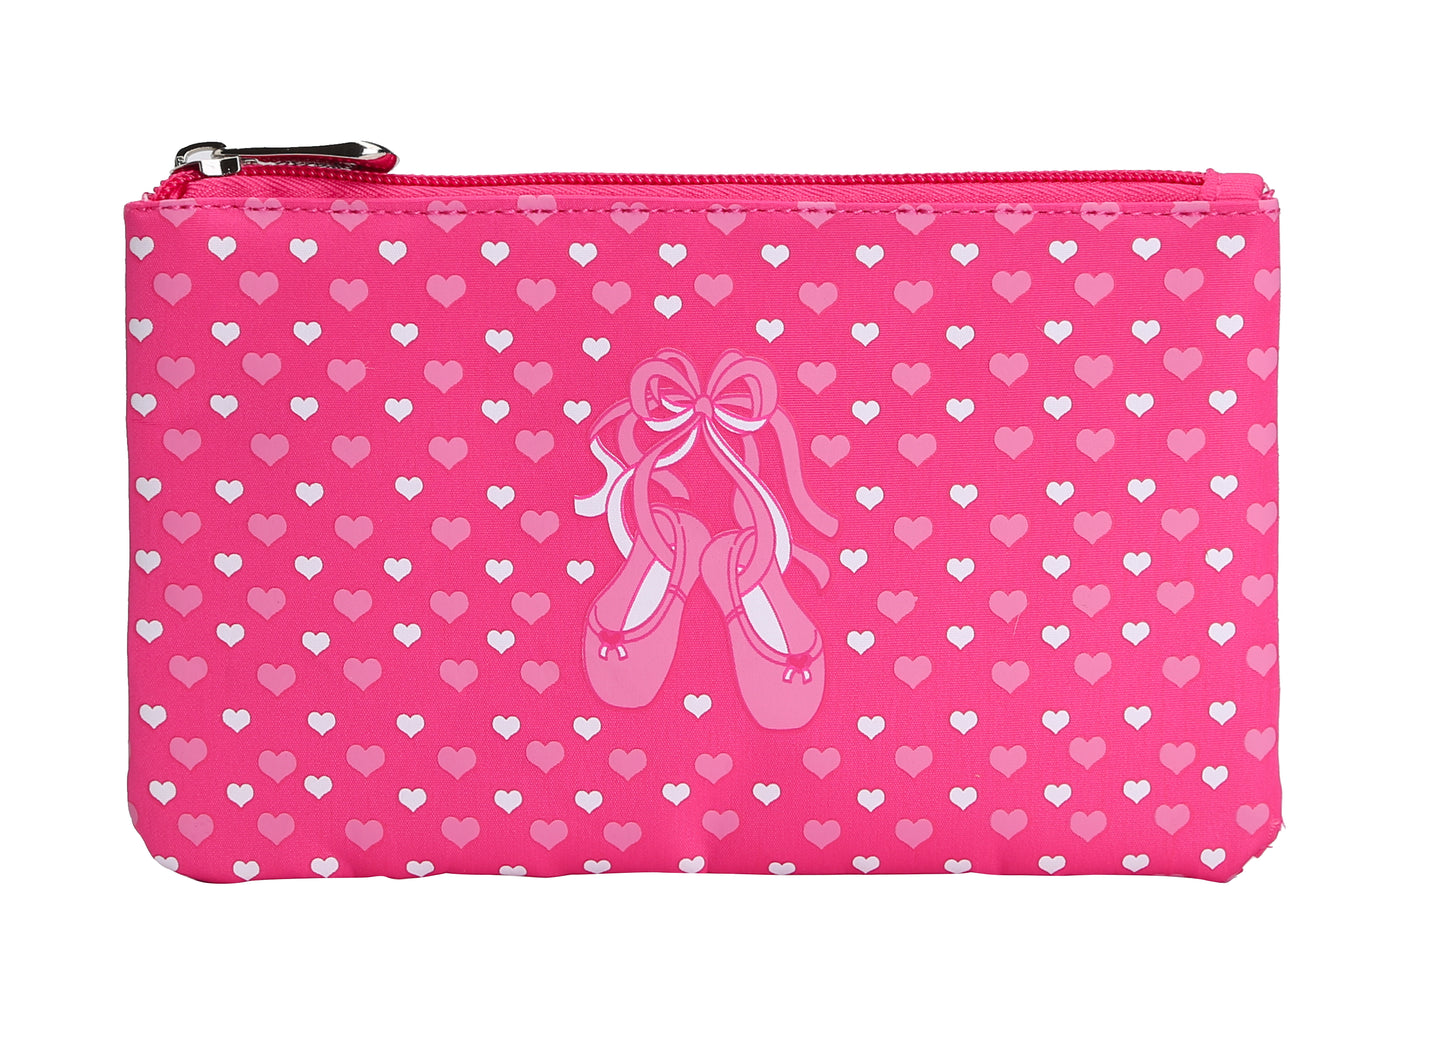 Slippers N' Hearts Accessory Pouch (BAL-60)